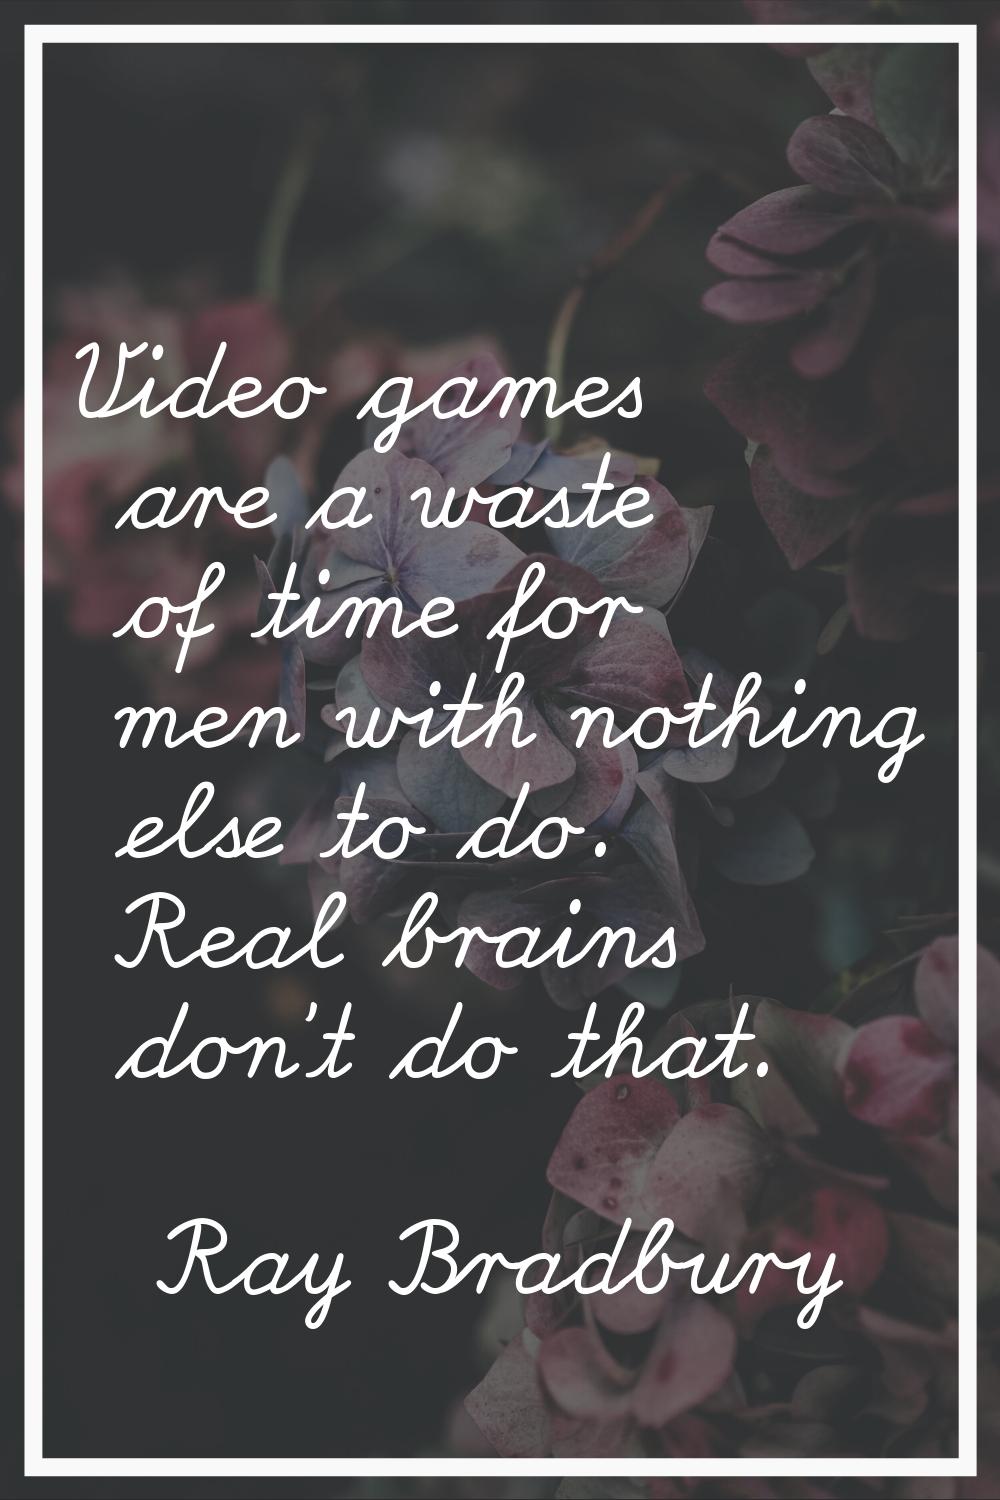 Video games are a waste of time for men with nothing else to do. Real brains don't do that.